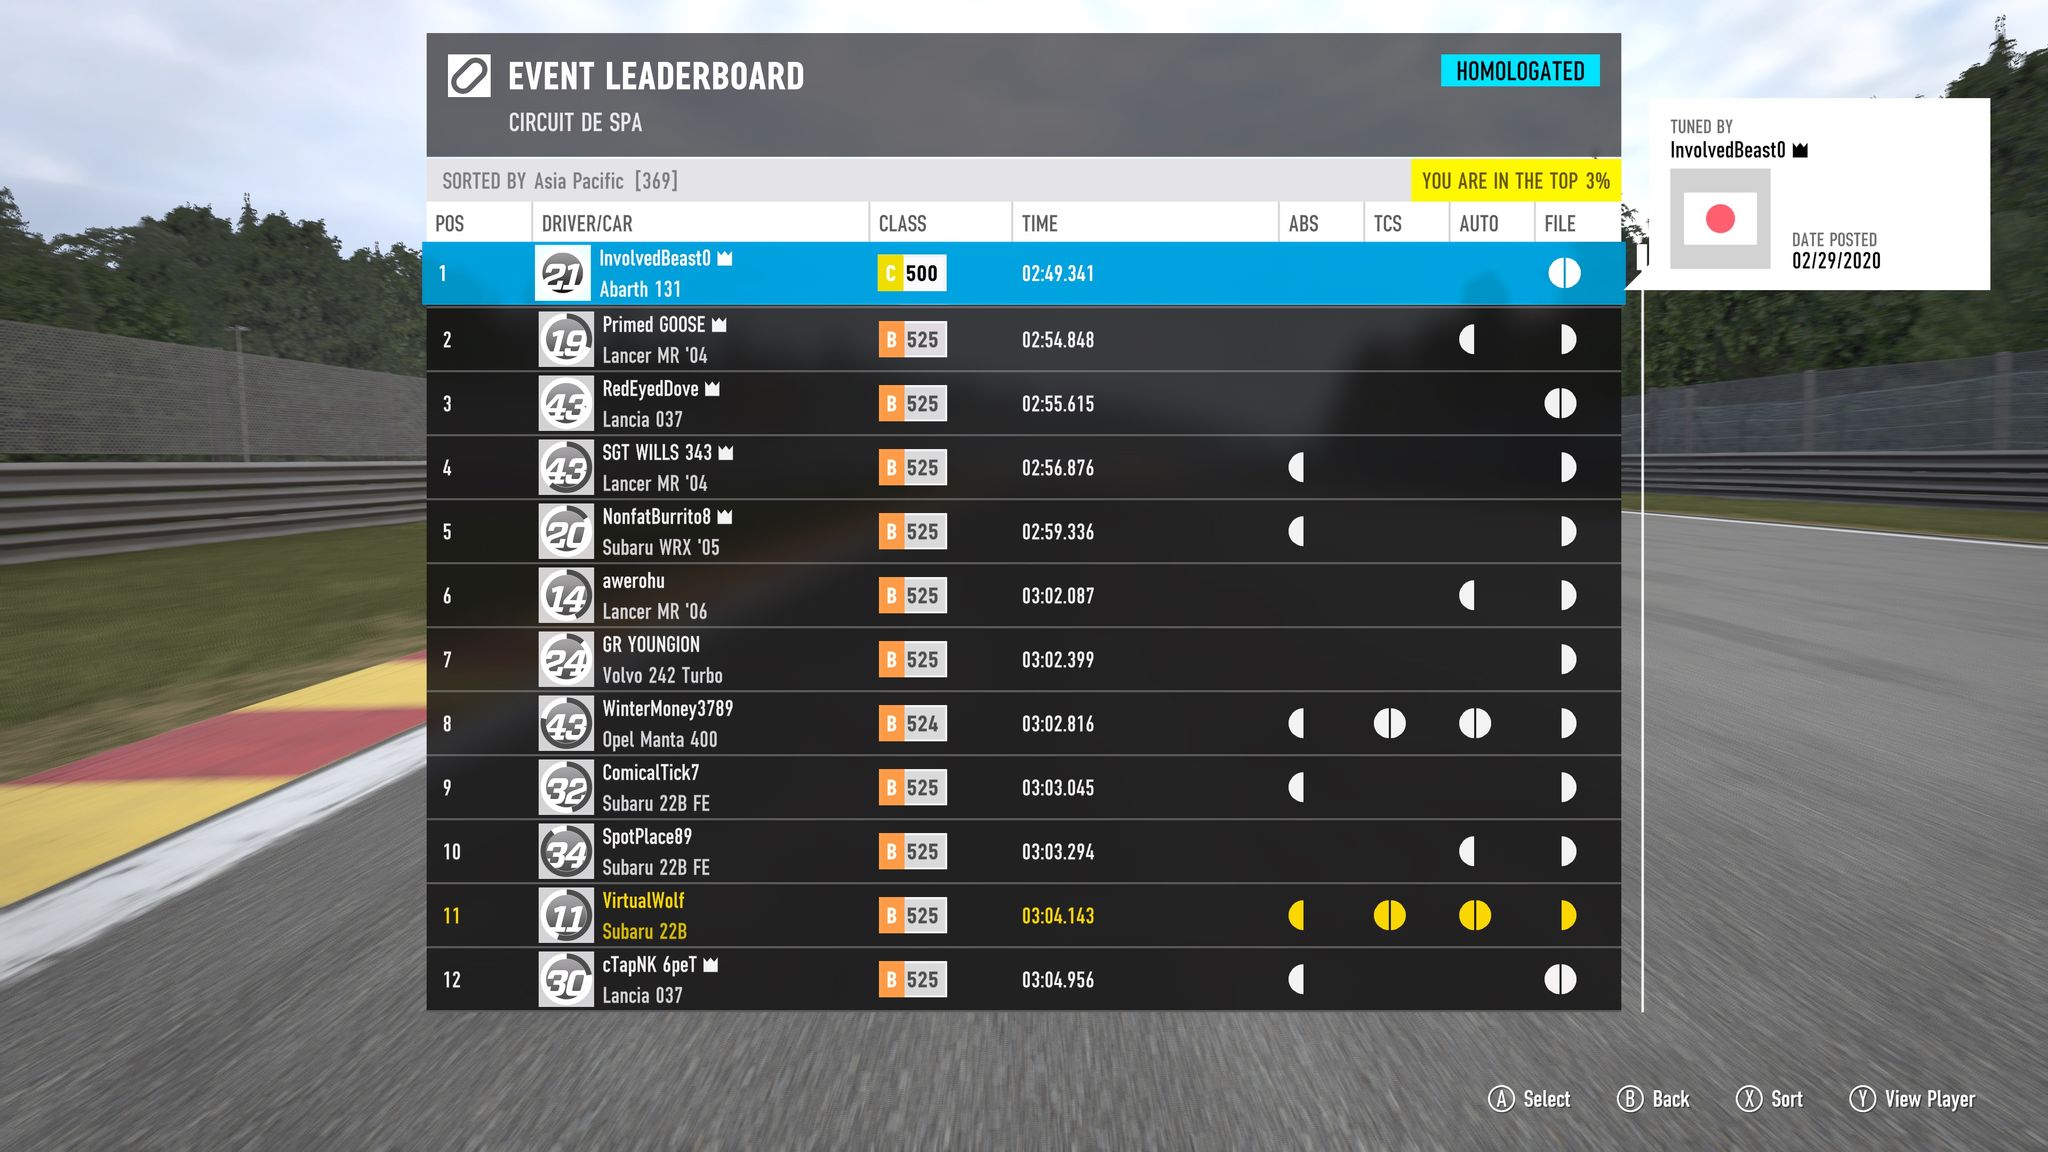 A screenshot from Forza Motorsport 7 at the end of a race showing that I'm ranked 11th on the leaderboards for this particular combination of track and car division.